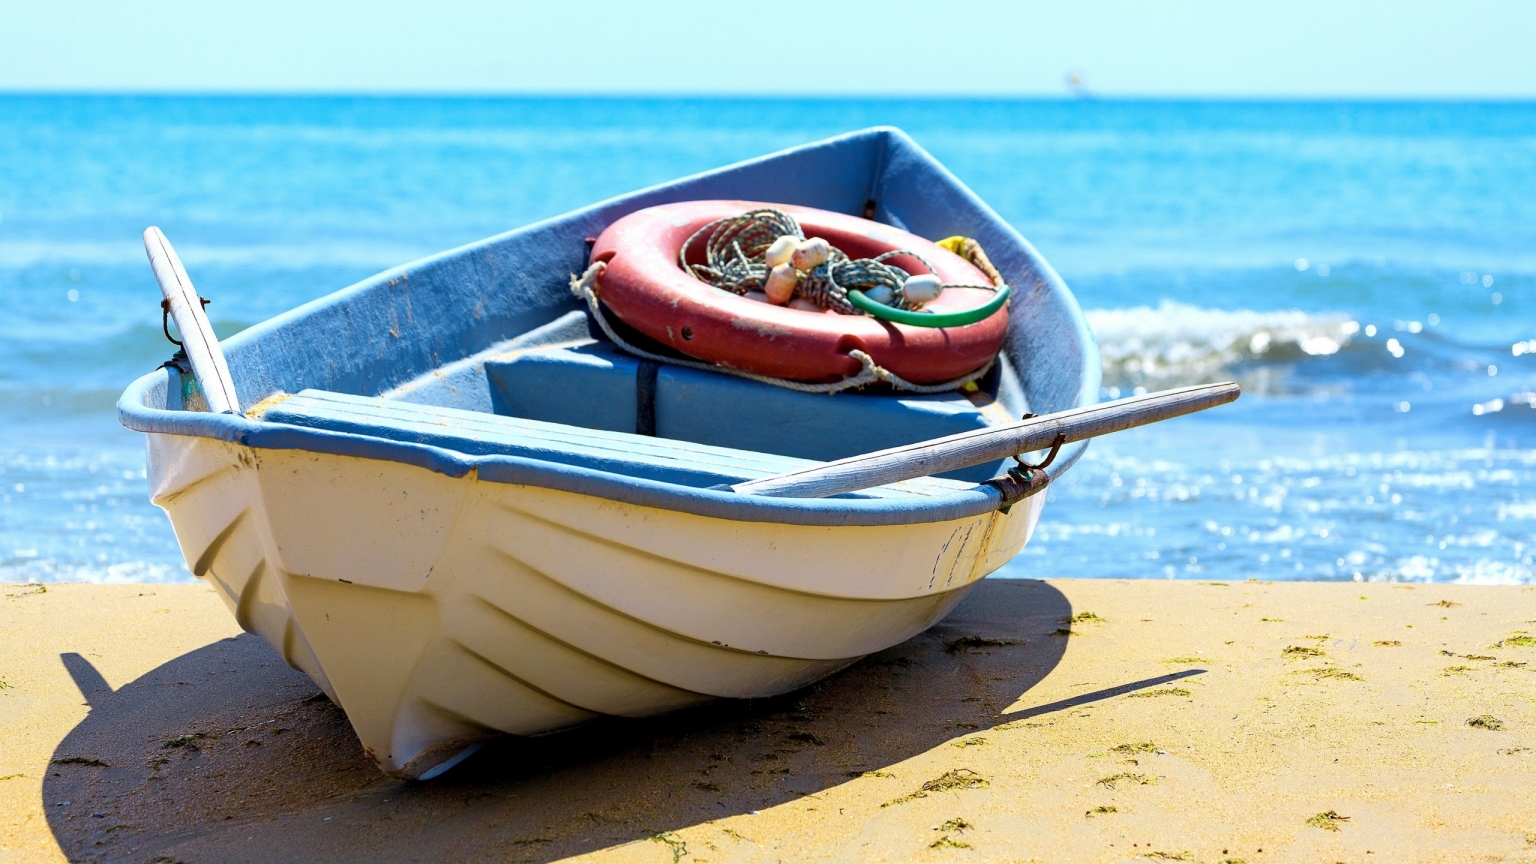 Old Boat on the Beach for 1536 x 864 HDTV resolution